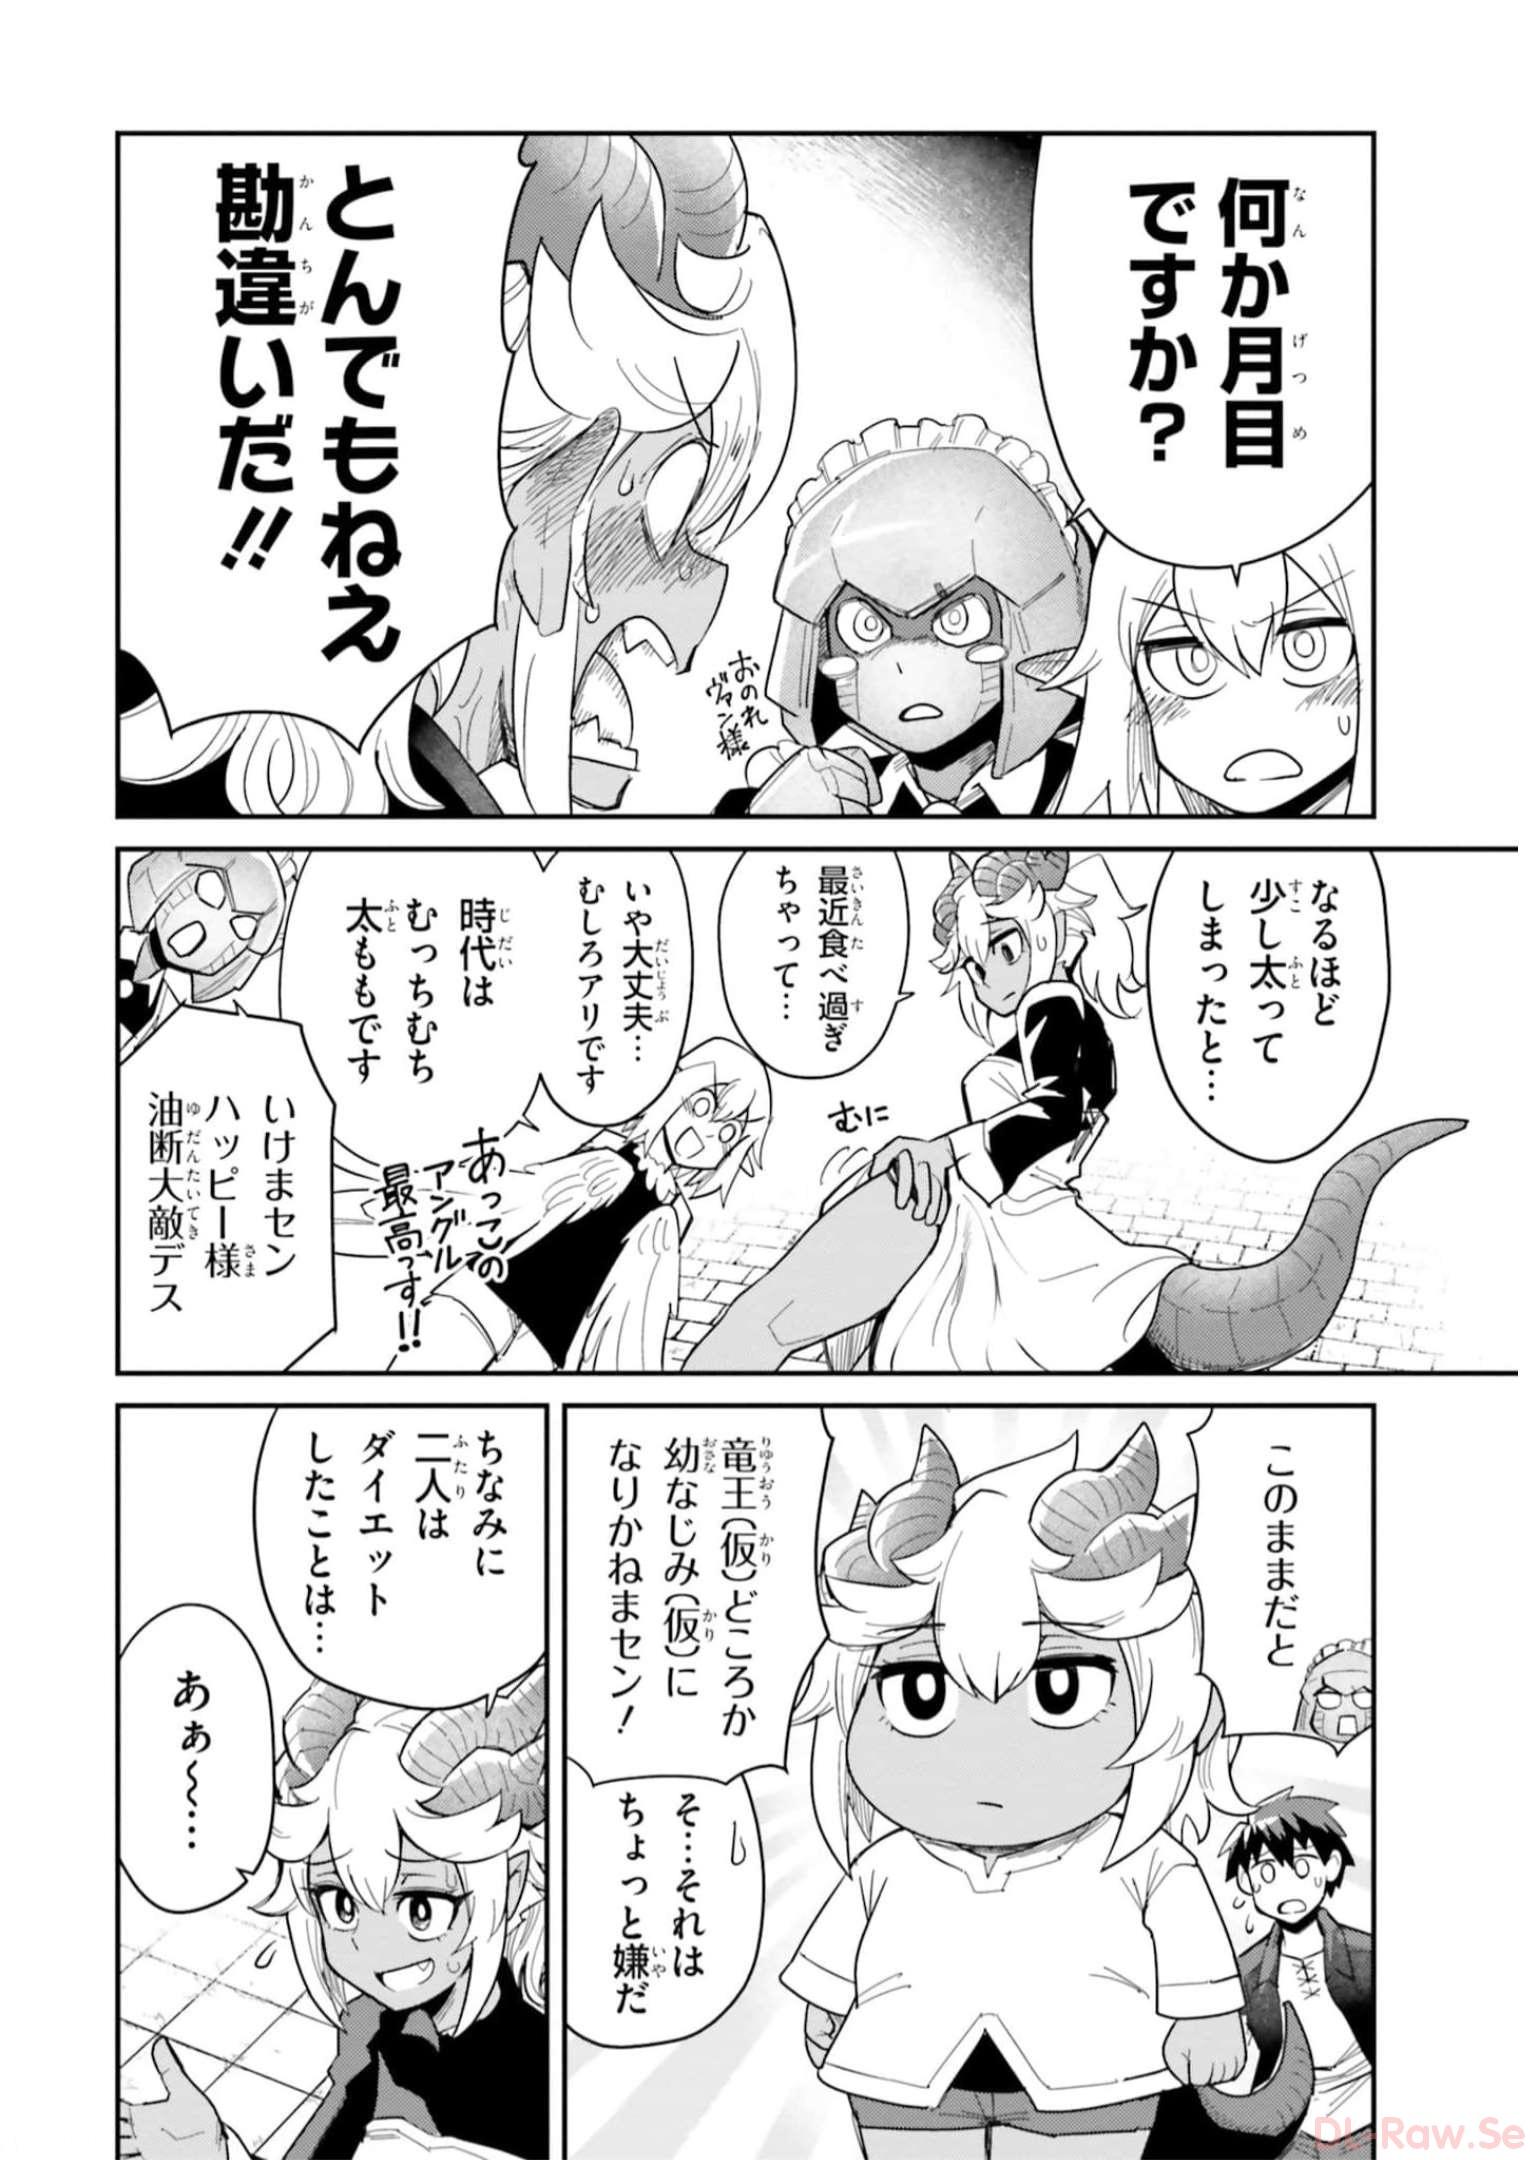 Dungeon Friends Forever Dungeon's Childhood Friend ダンジョンの幼なじみ 第24話 - Page 4